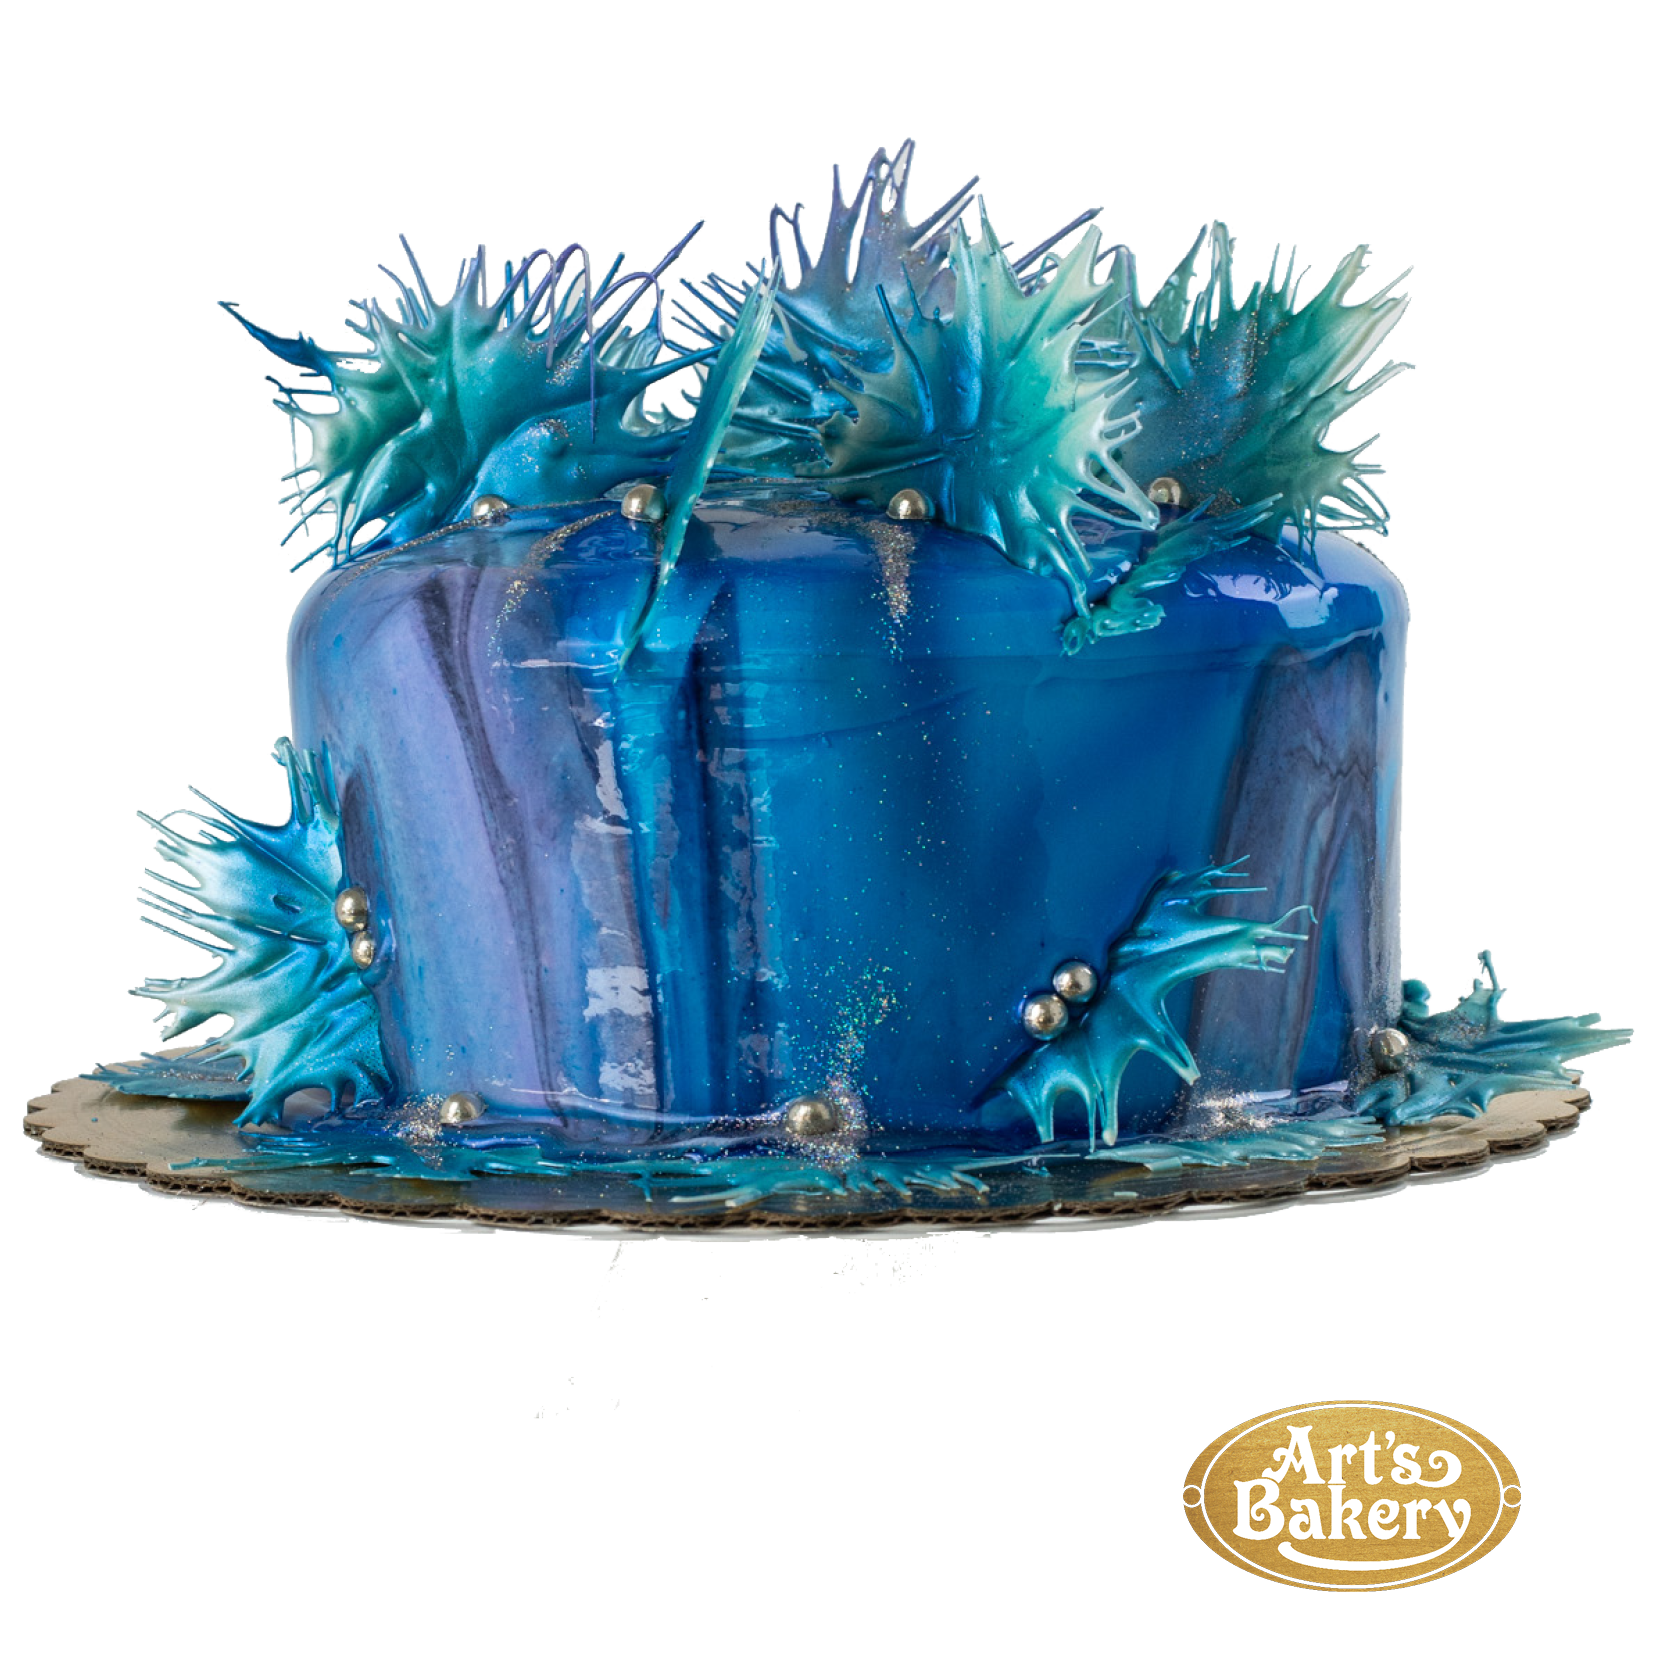 Watercolor Ombre Cake from Caketopia - Cake Geek Magazine